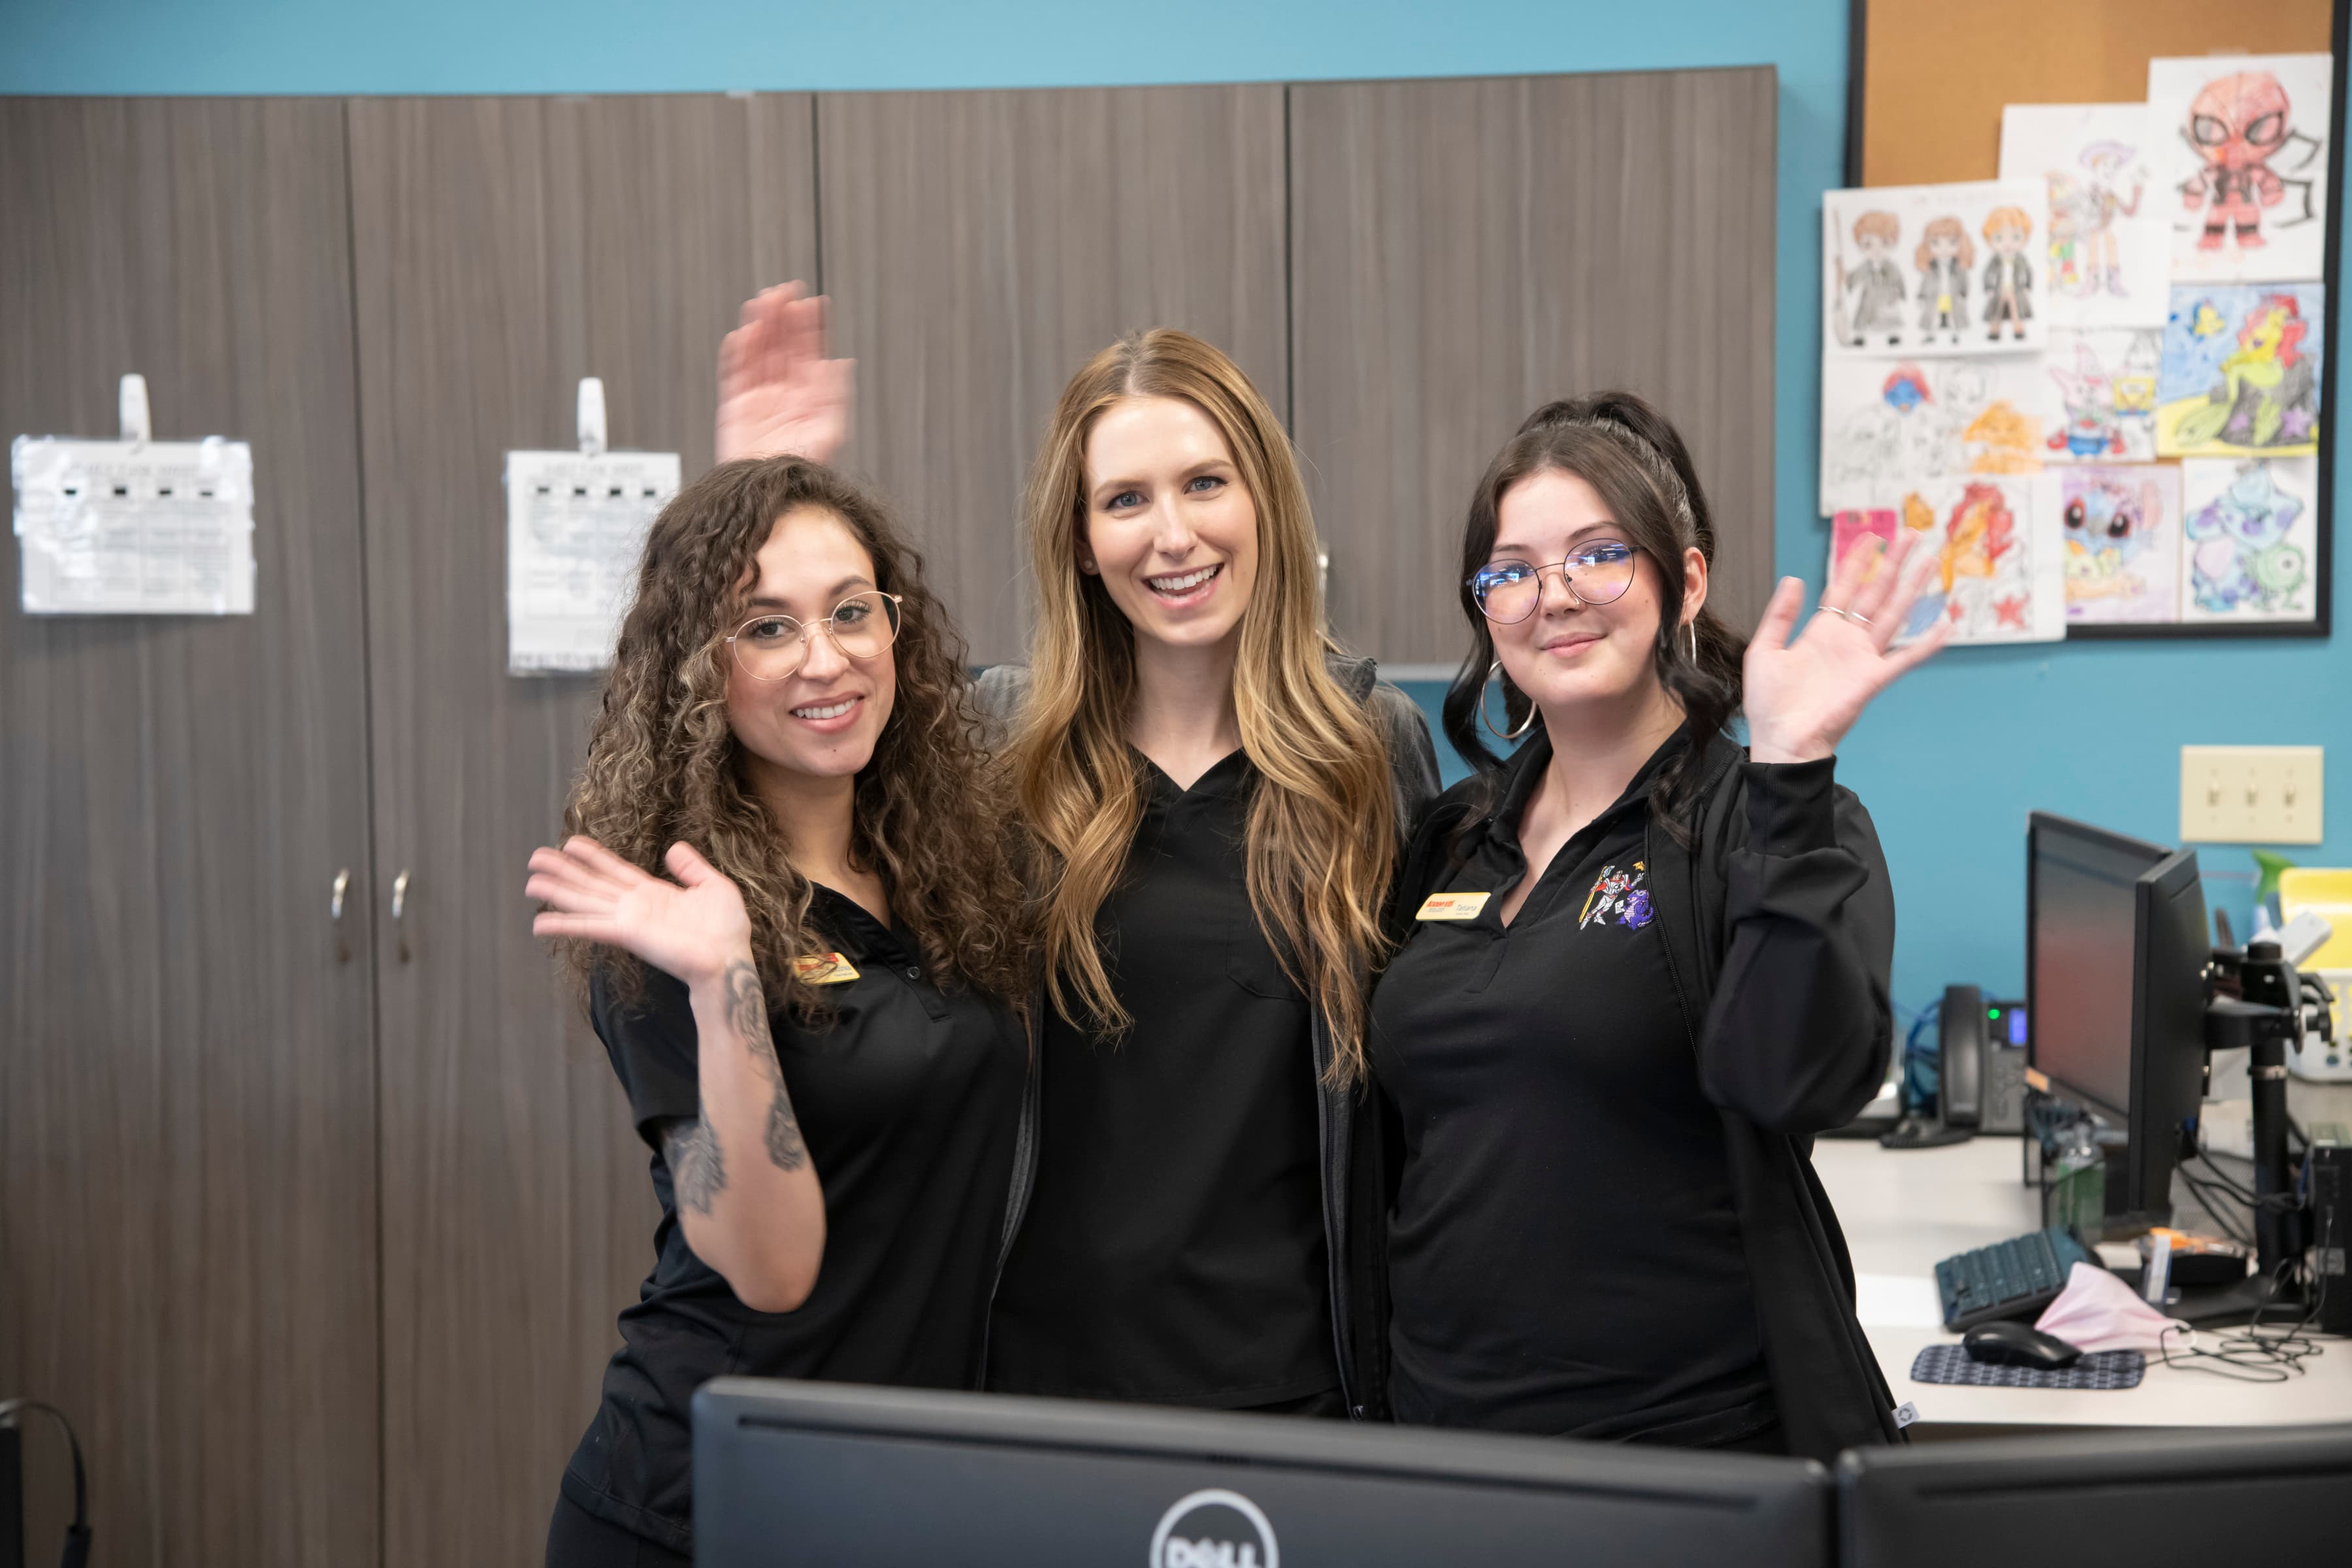 Pediatric dental care providers at our South Academy location in Colorado Springs. There are four women wearing black coverings and are happy and waving.